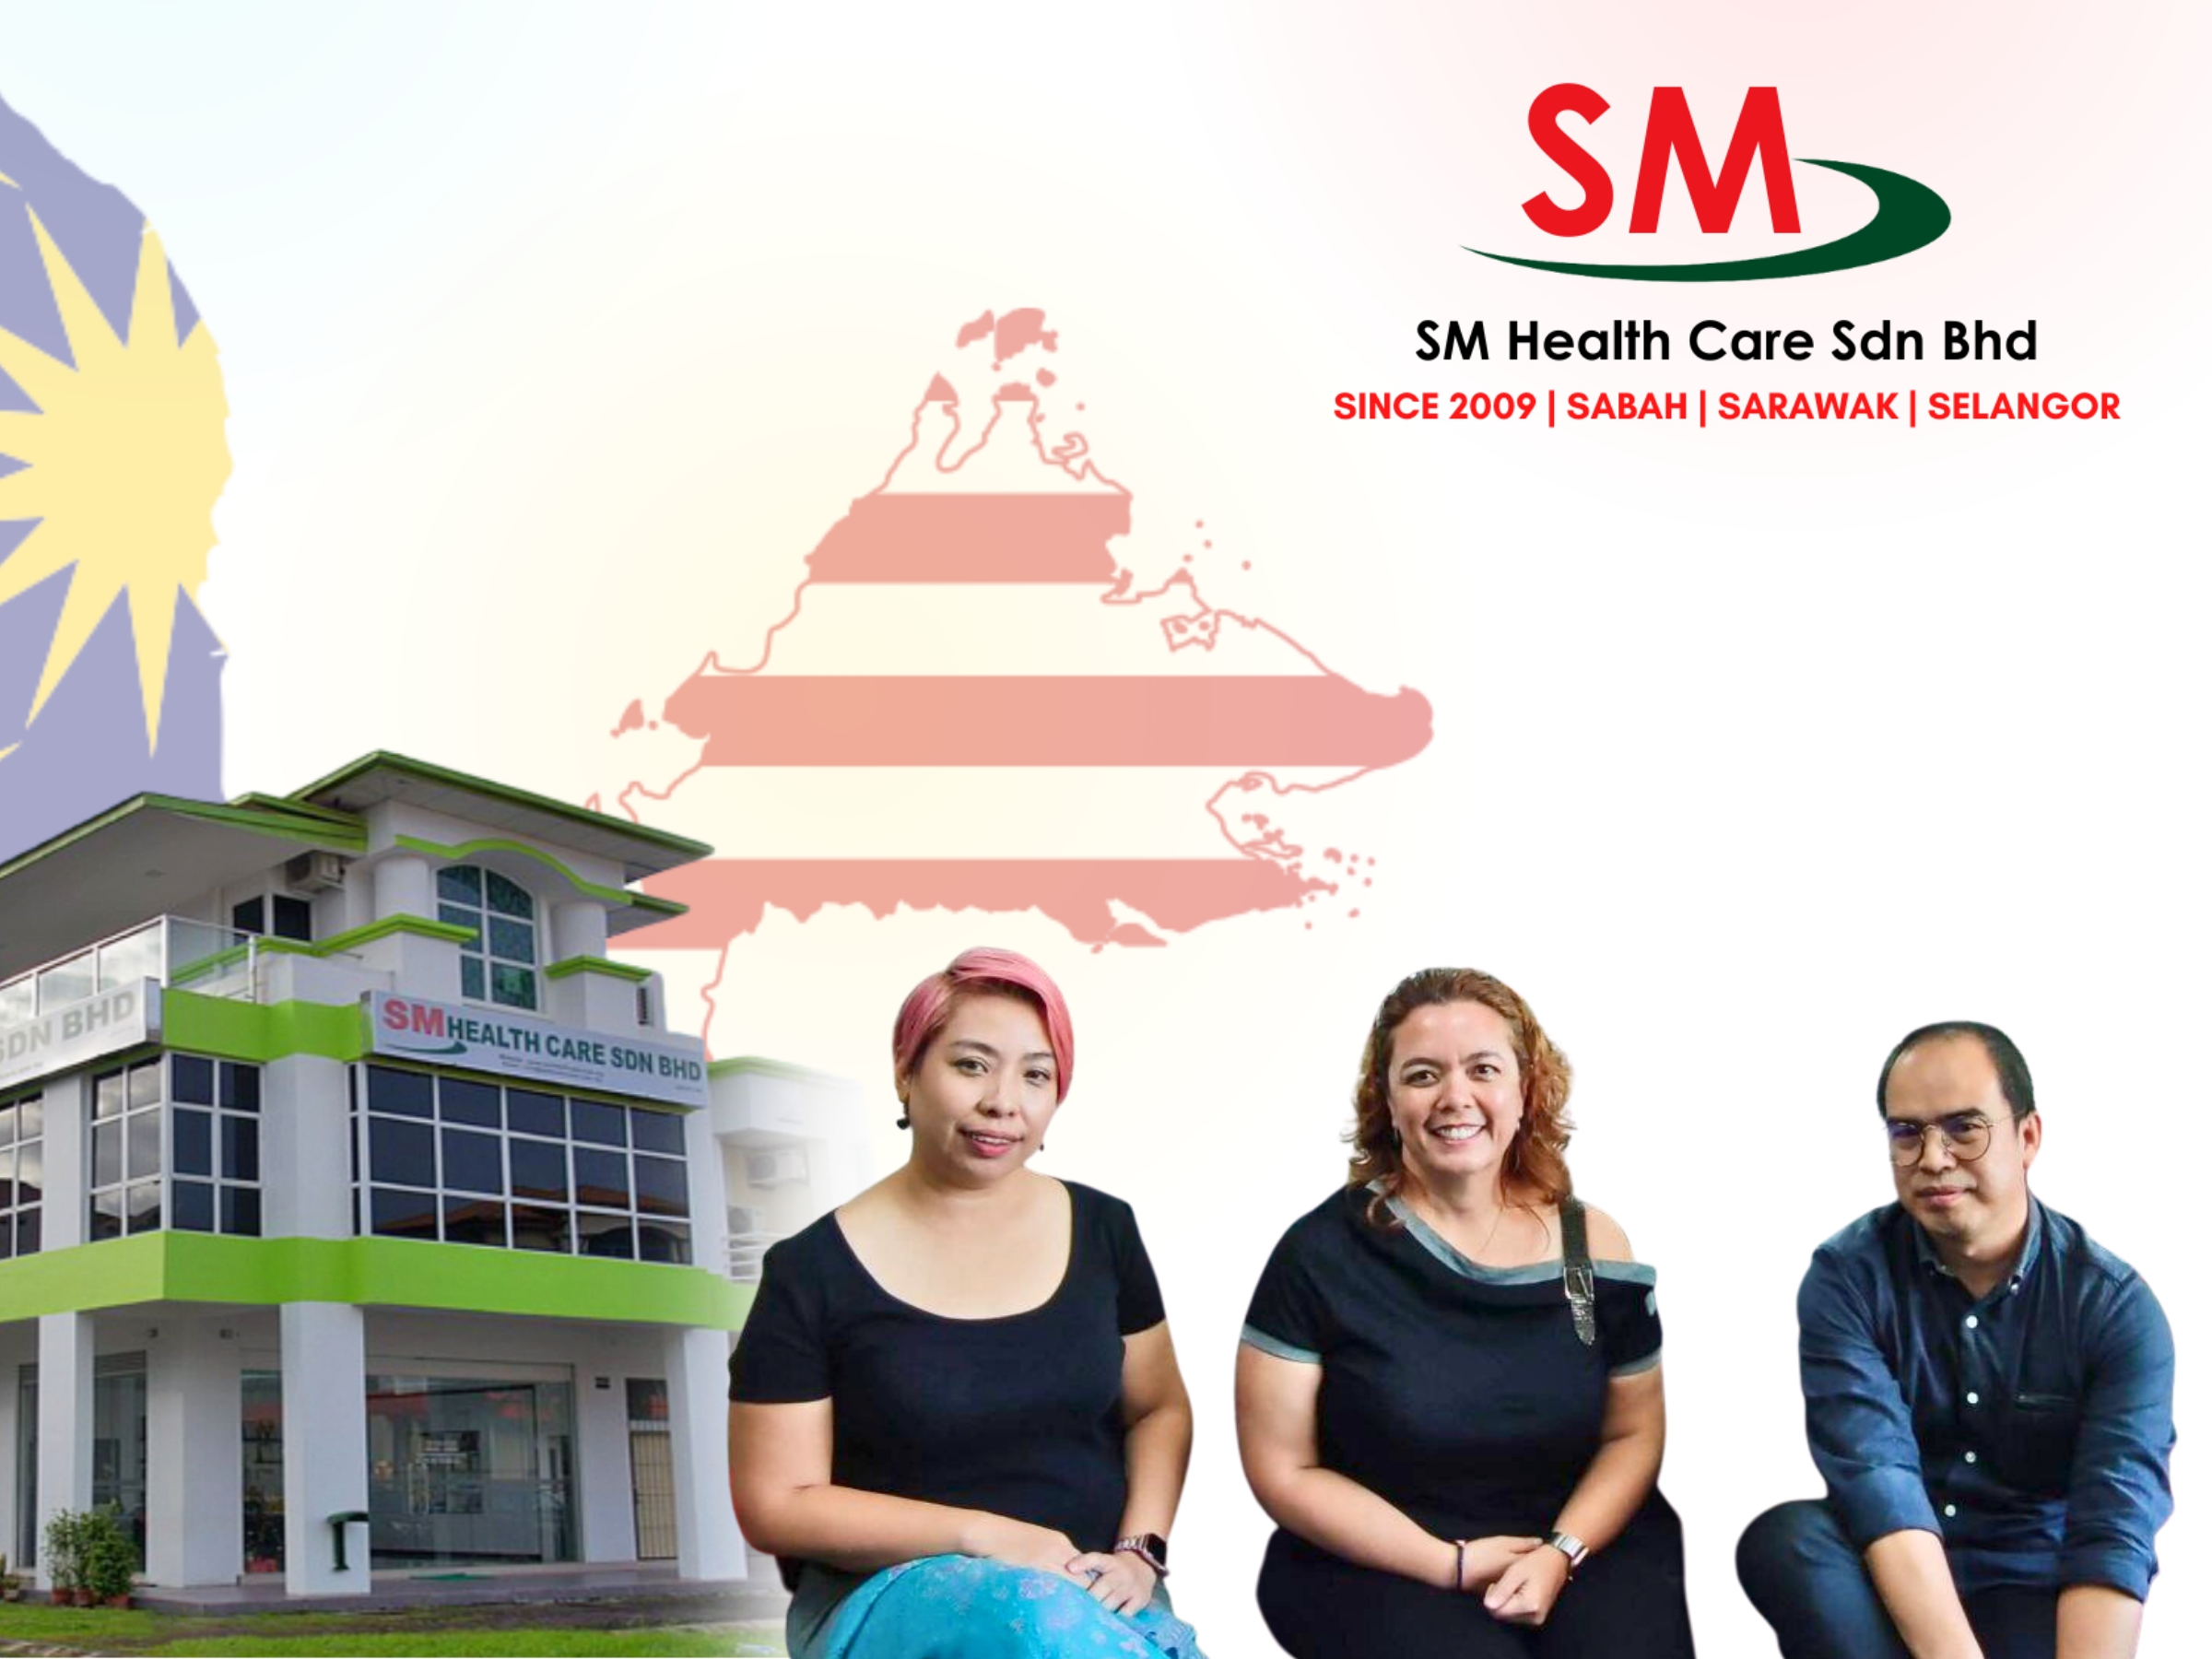 Founders of SM Health Care Sdn Bhd, with SM Health Care Sdn Bhd HQ office in the background